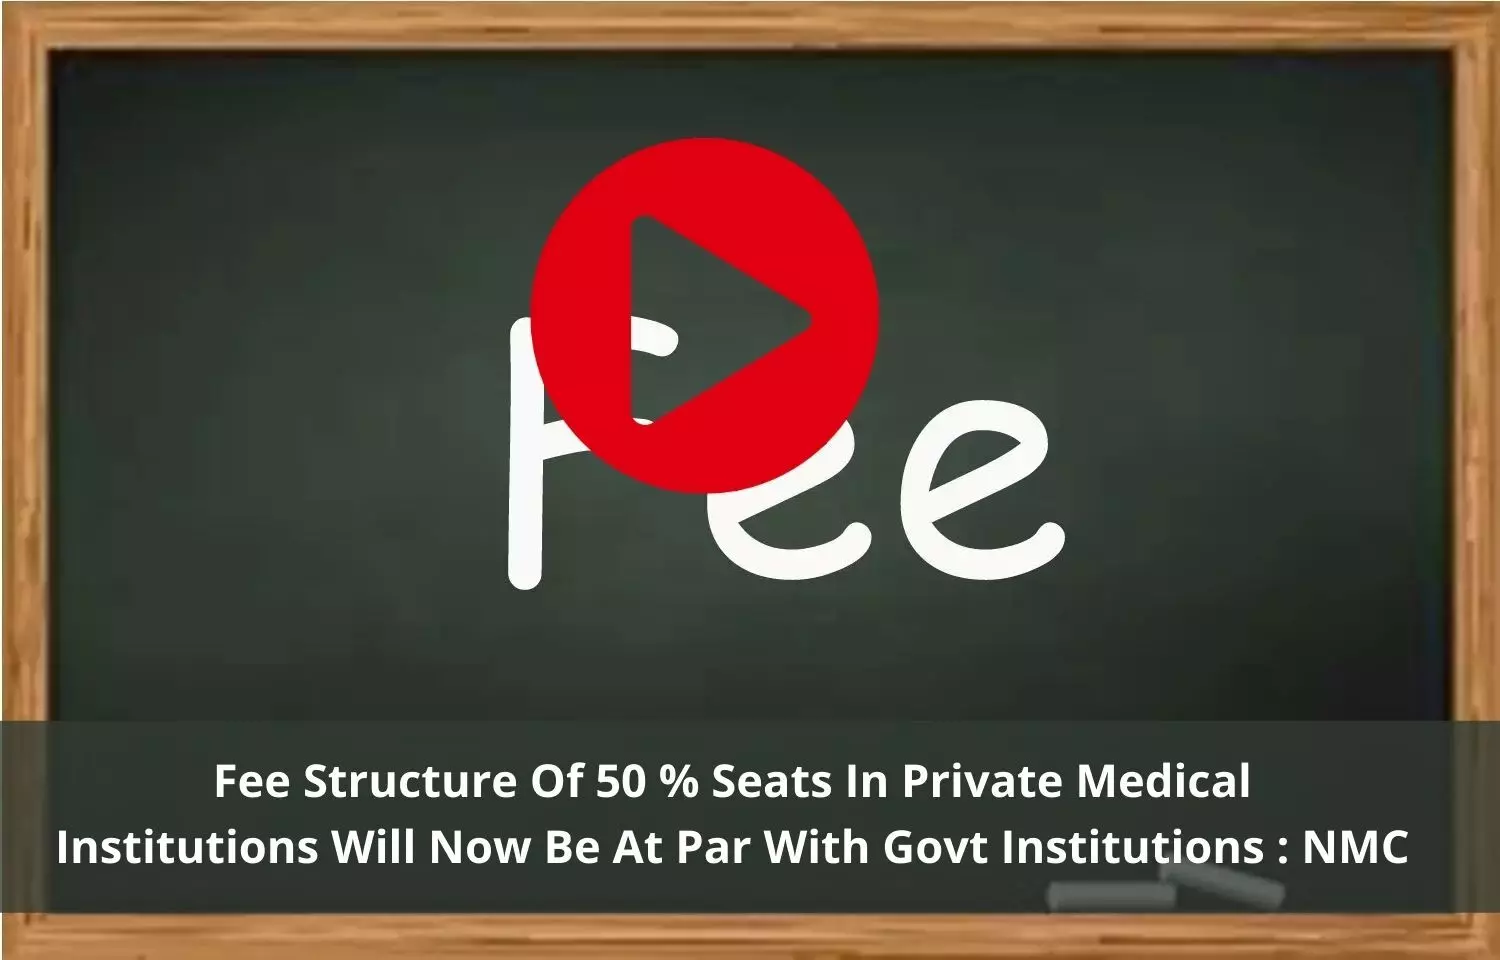 NMC says fee structure of 50 percent seats in private medical colleges will now be at par with govt ones